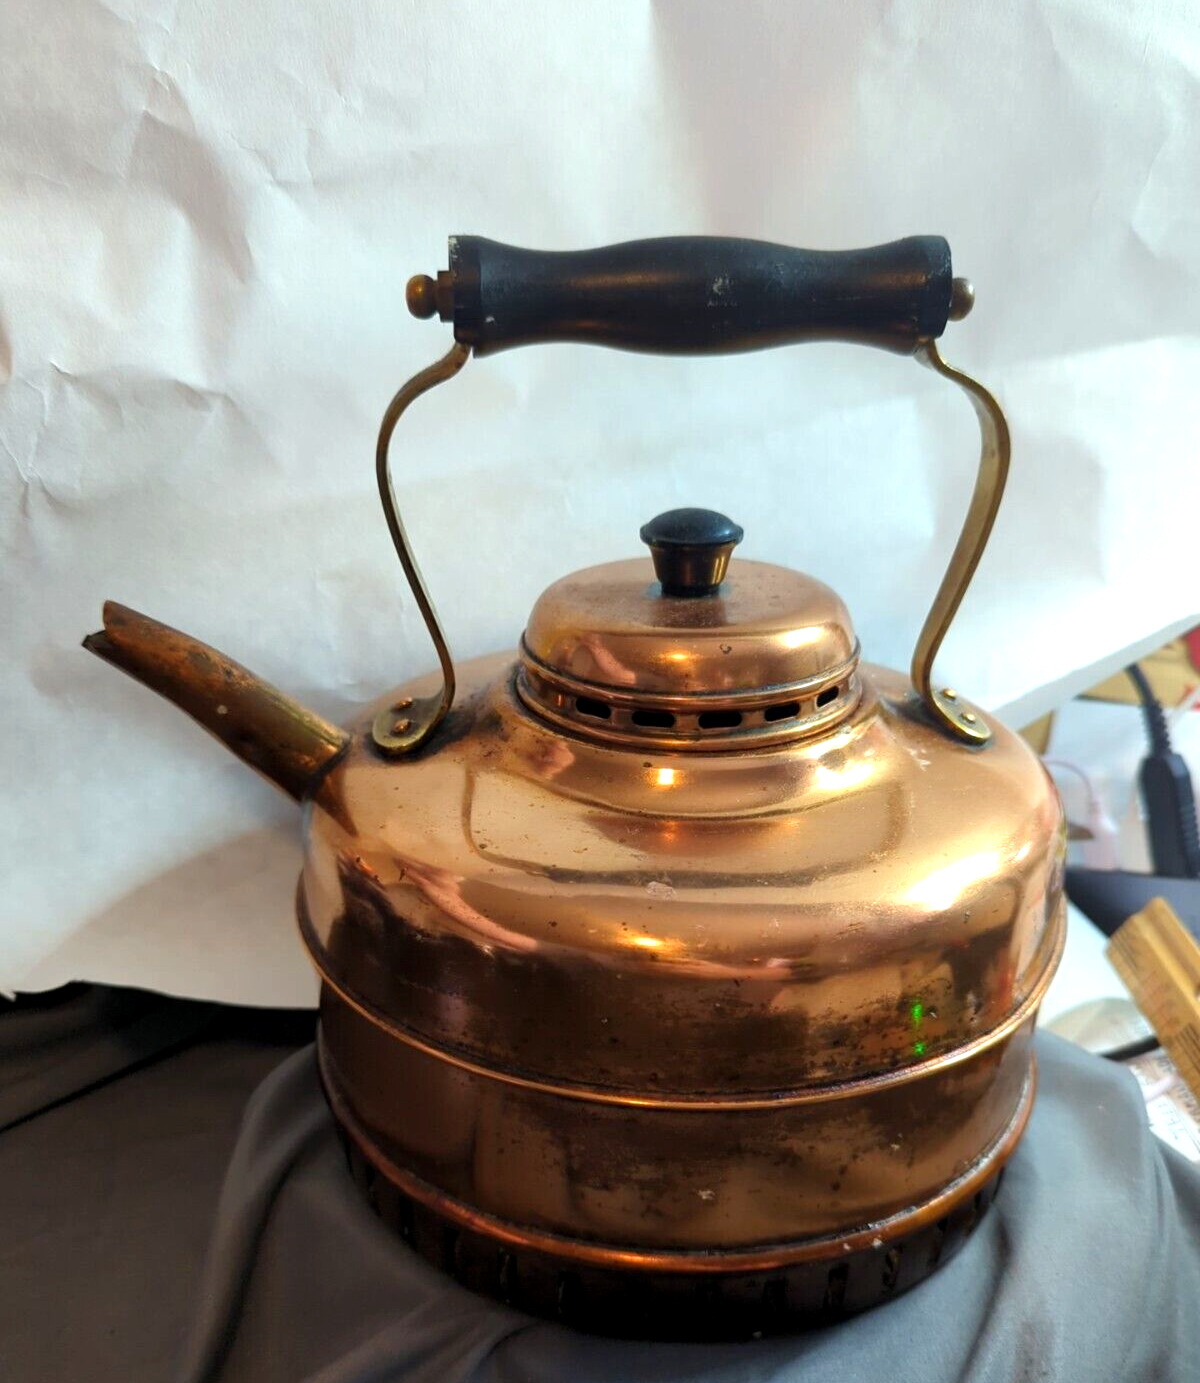 Big Old Vintage Copper Rapid Boil Coil Made in England English Tea Kettle Teapot